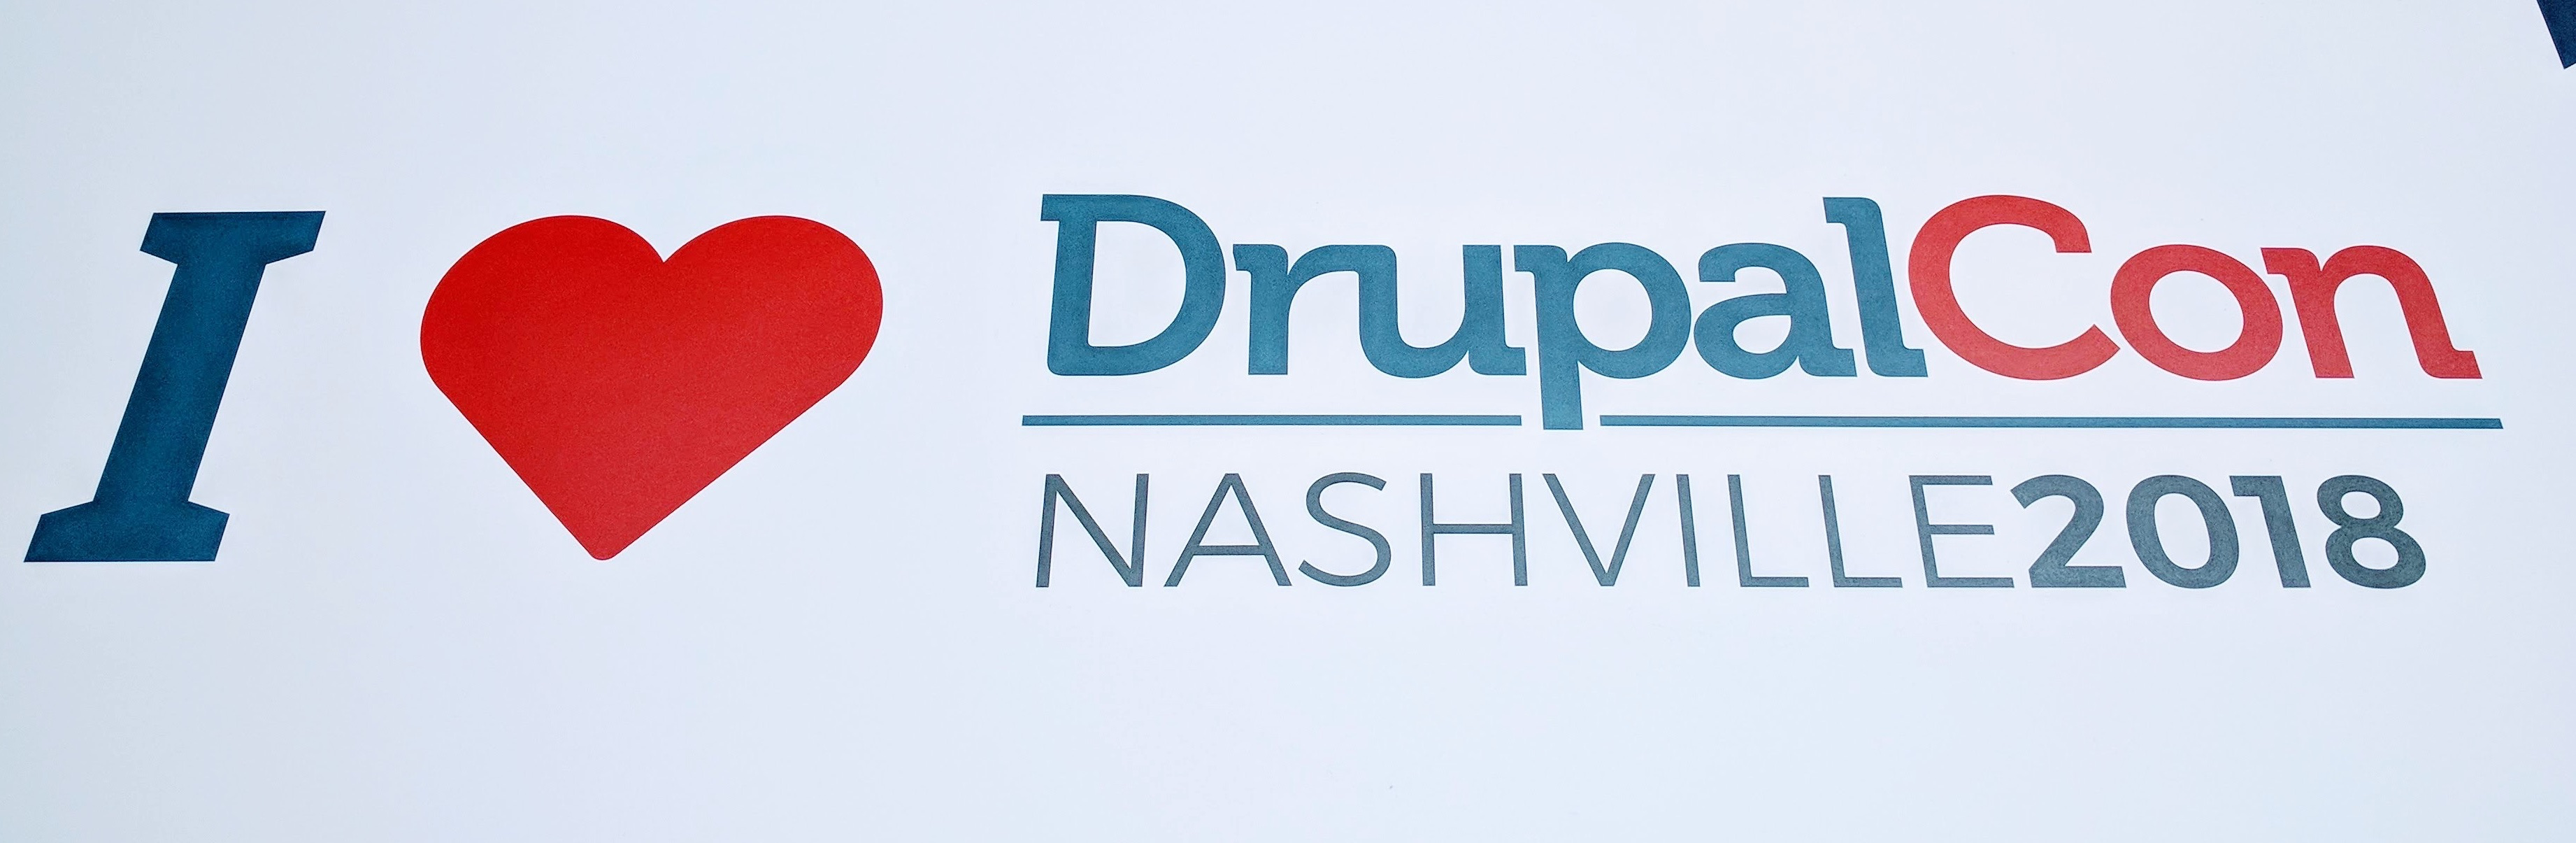 DrupalCon Nashville sign with the words "I Love DrupalCon Nashville 2018"; the word love is replaced with the shape of a heart.